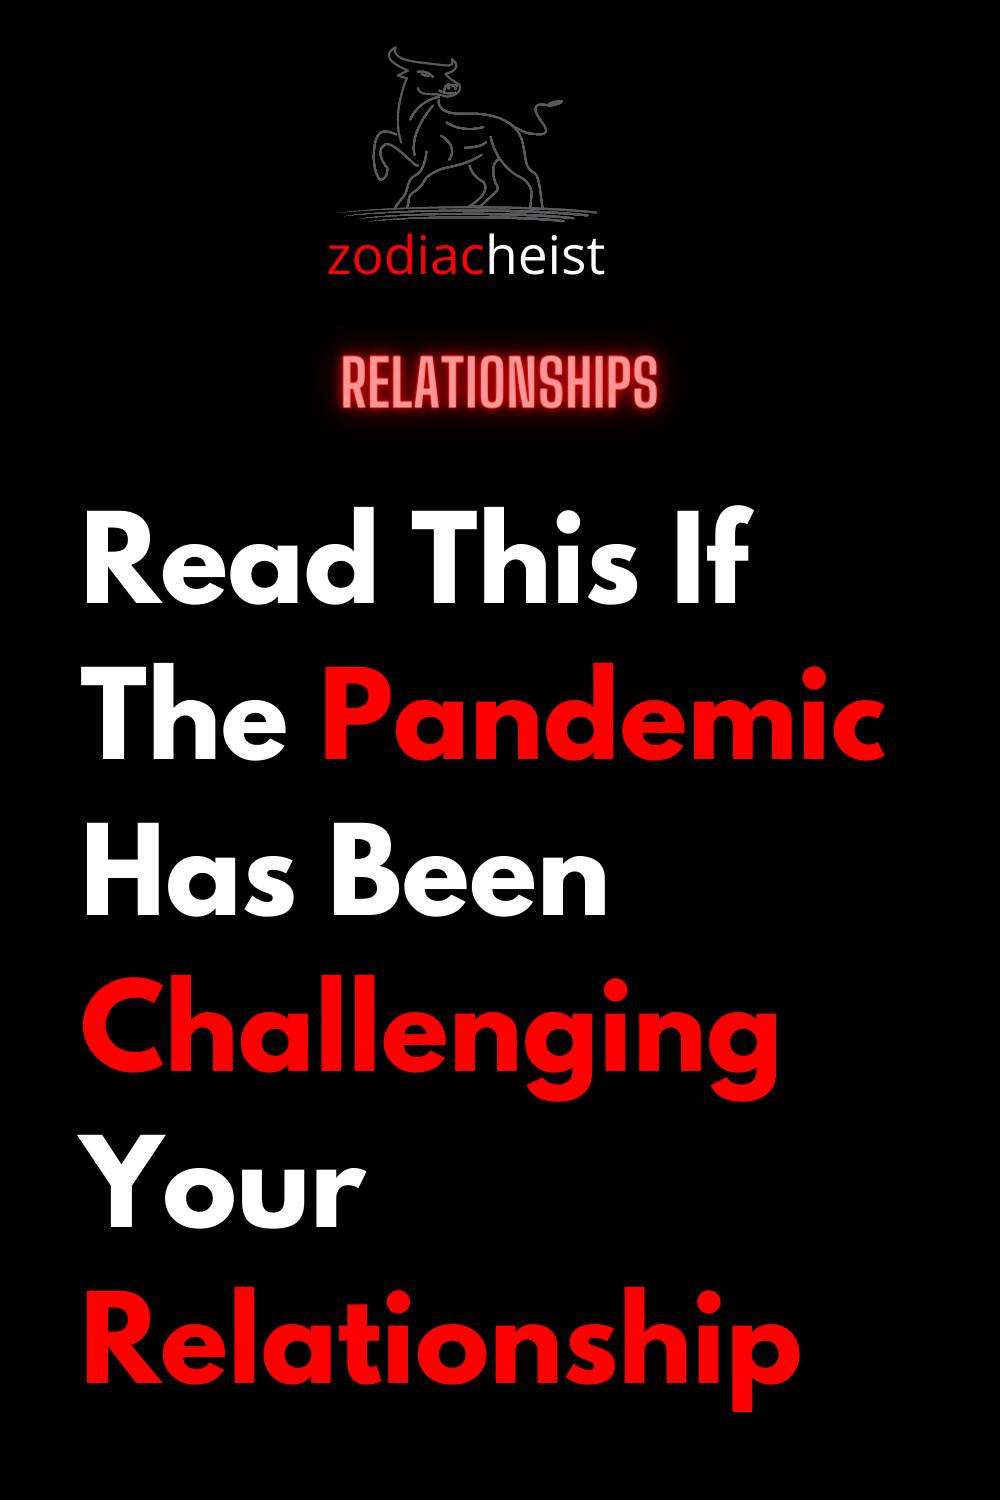 Read This If The Pandemic Has Been Challenging Your Relationship